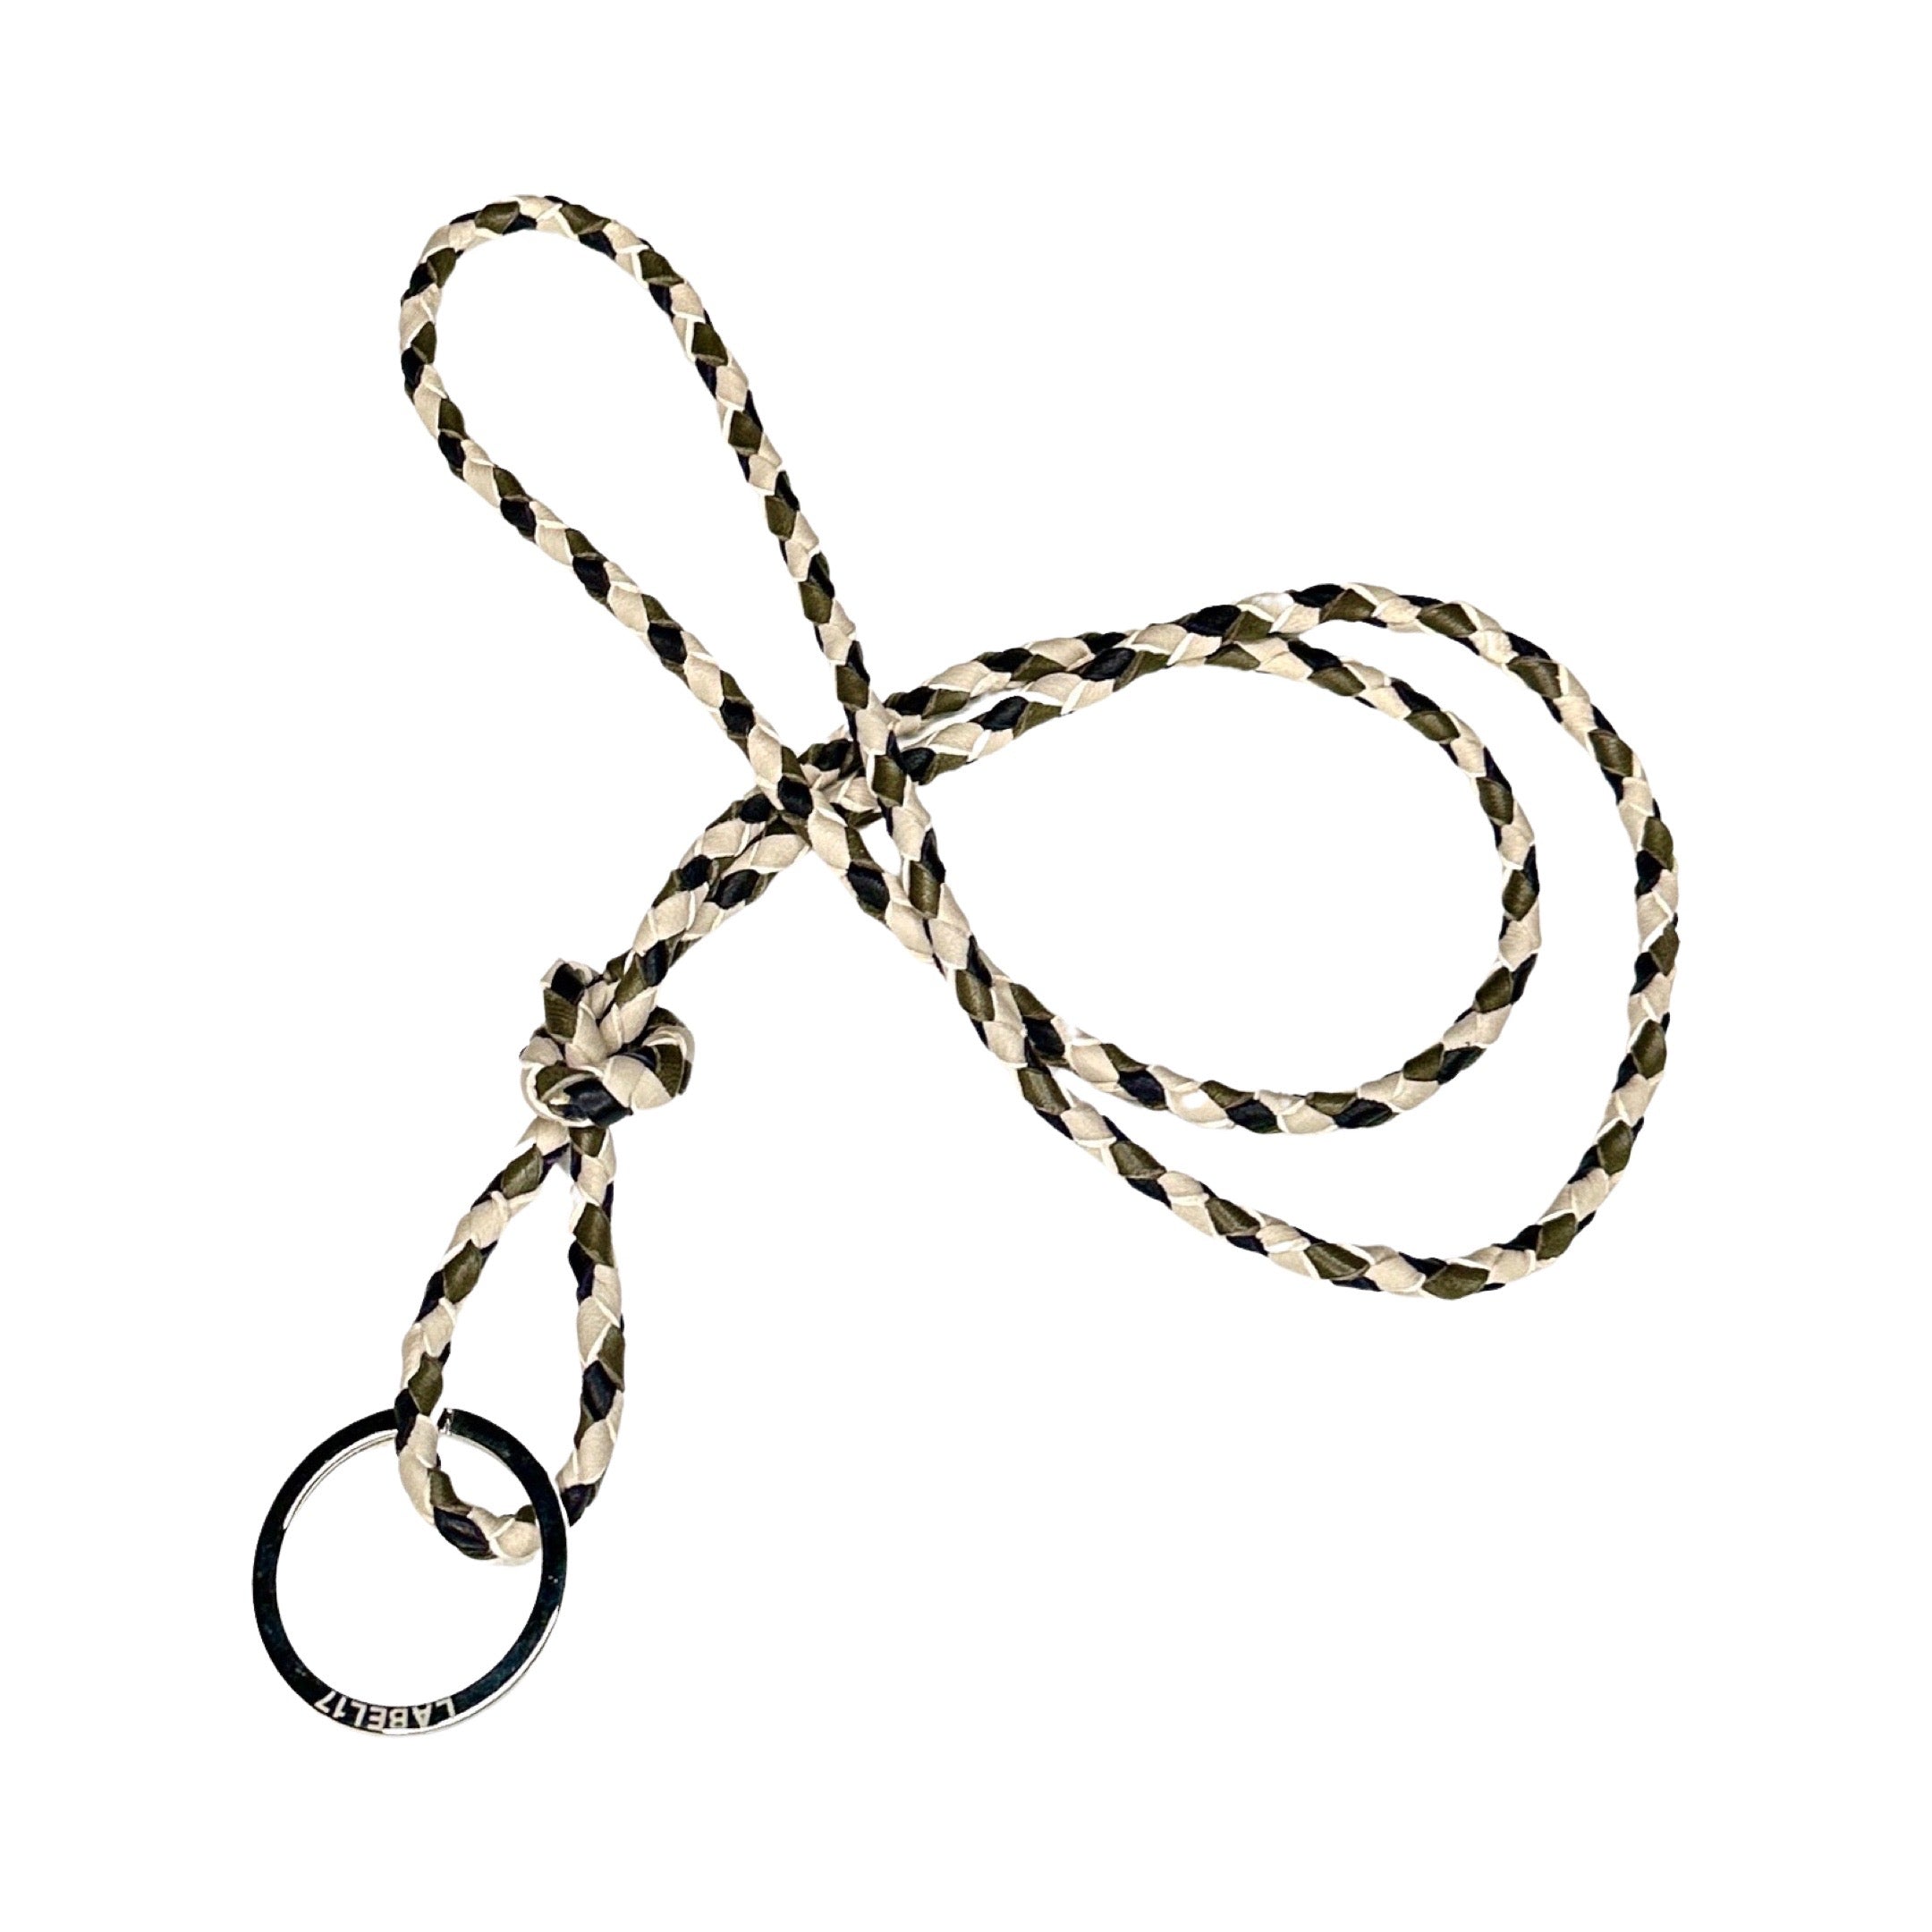 LABEL17 Braided Keyring Necklace, Trio